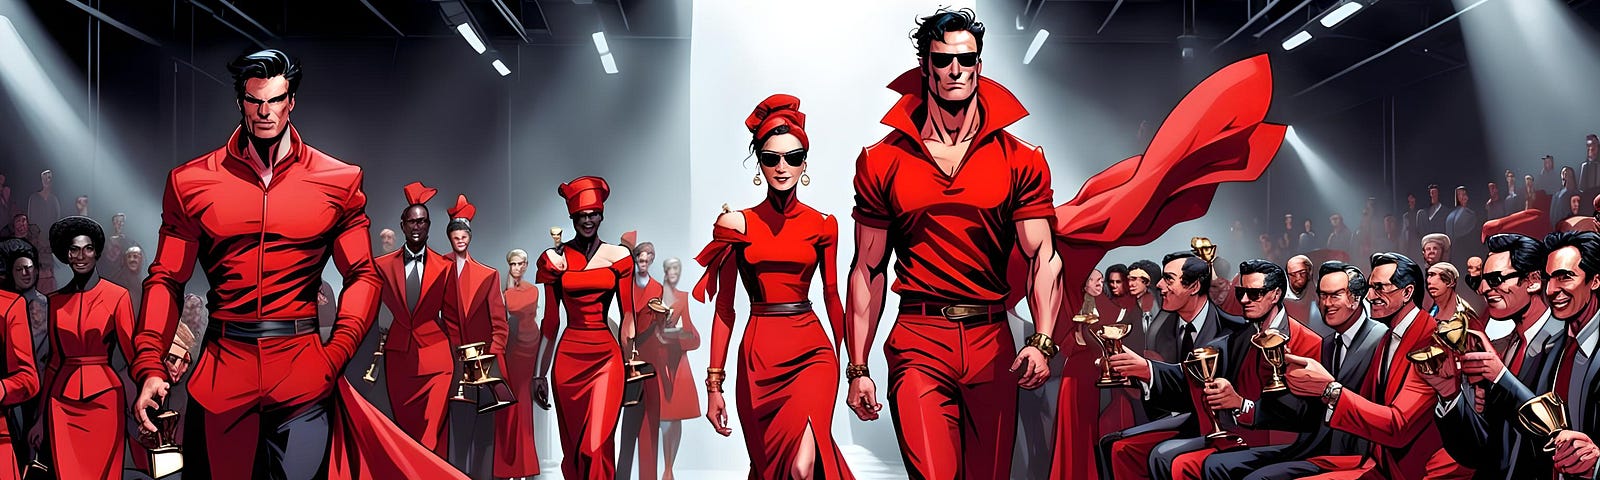 People dressed in red on the catwalk